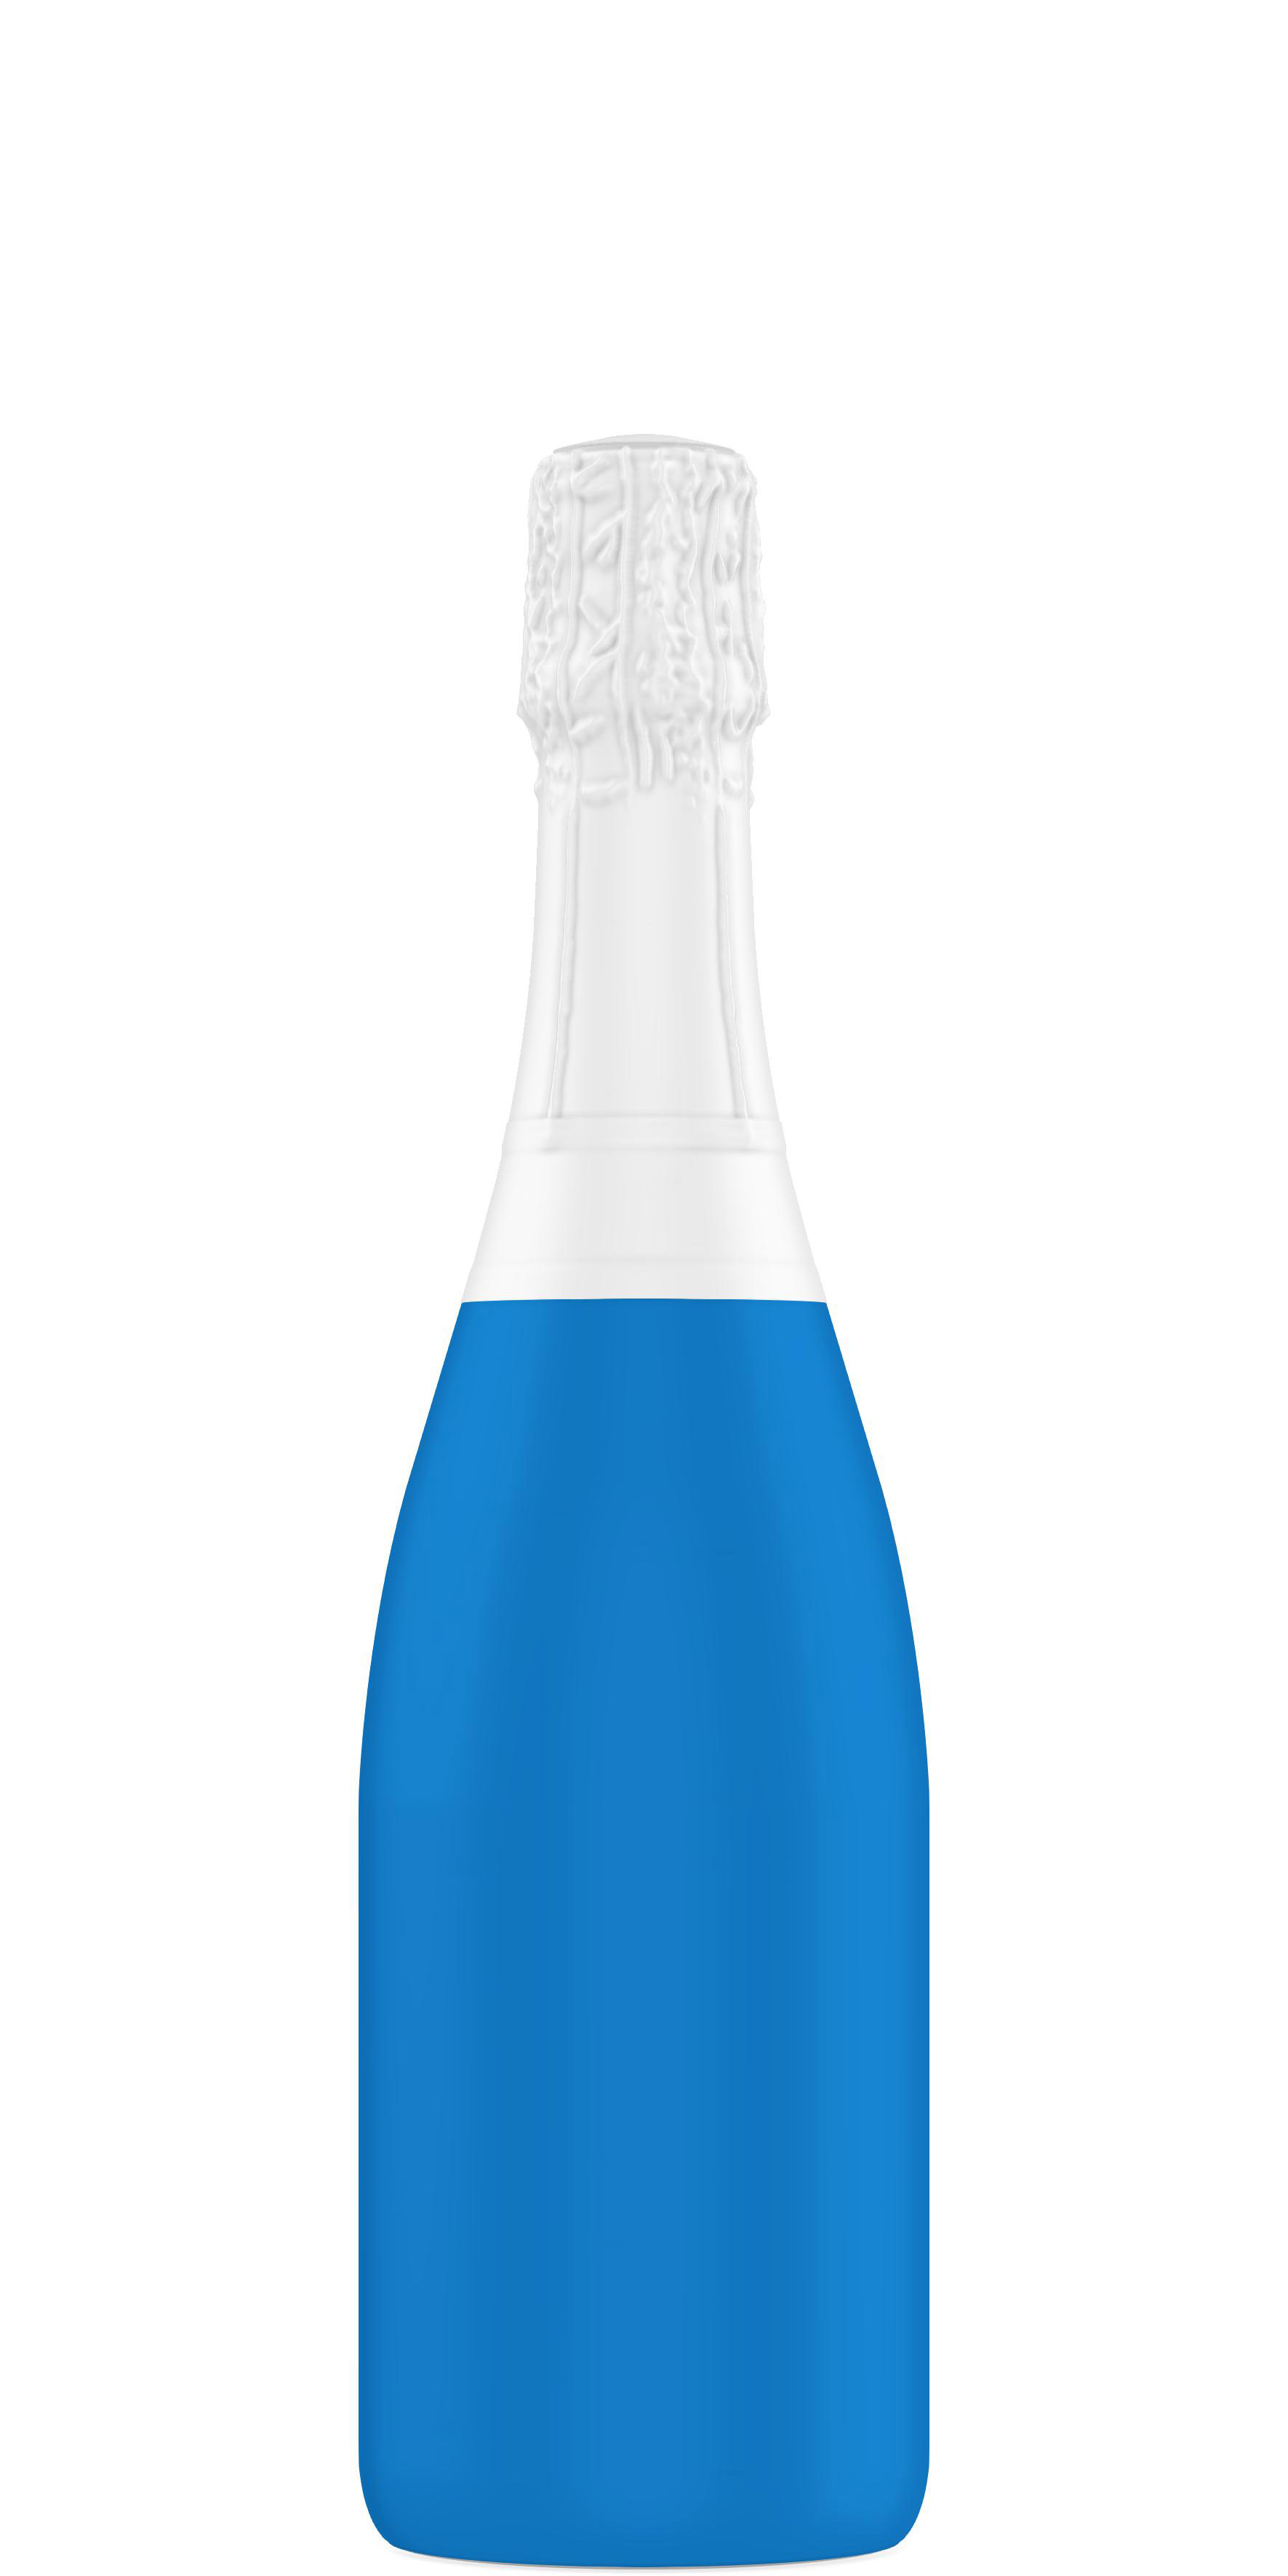 Packaging shape of champagne